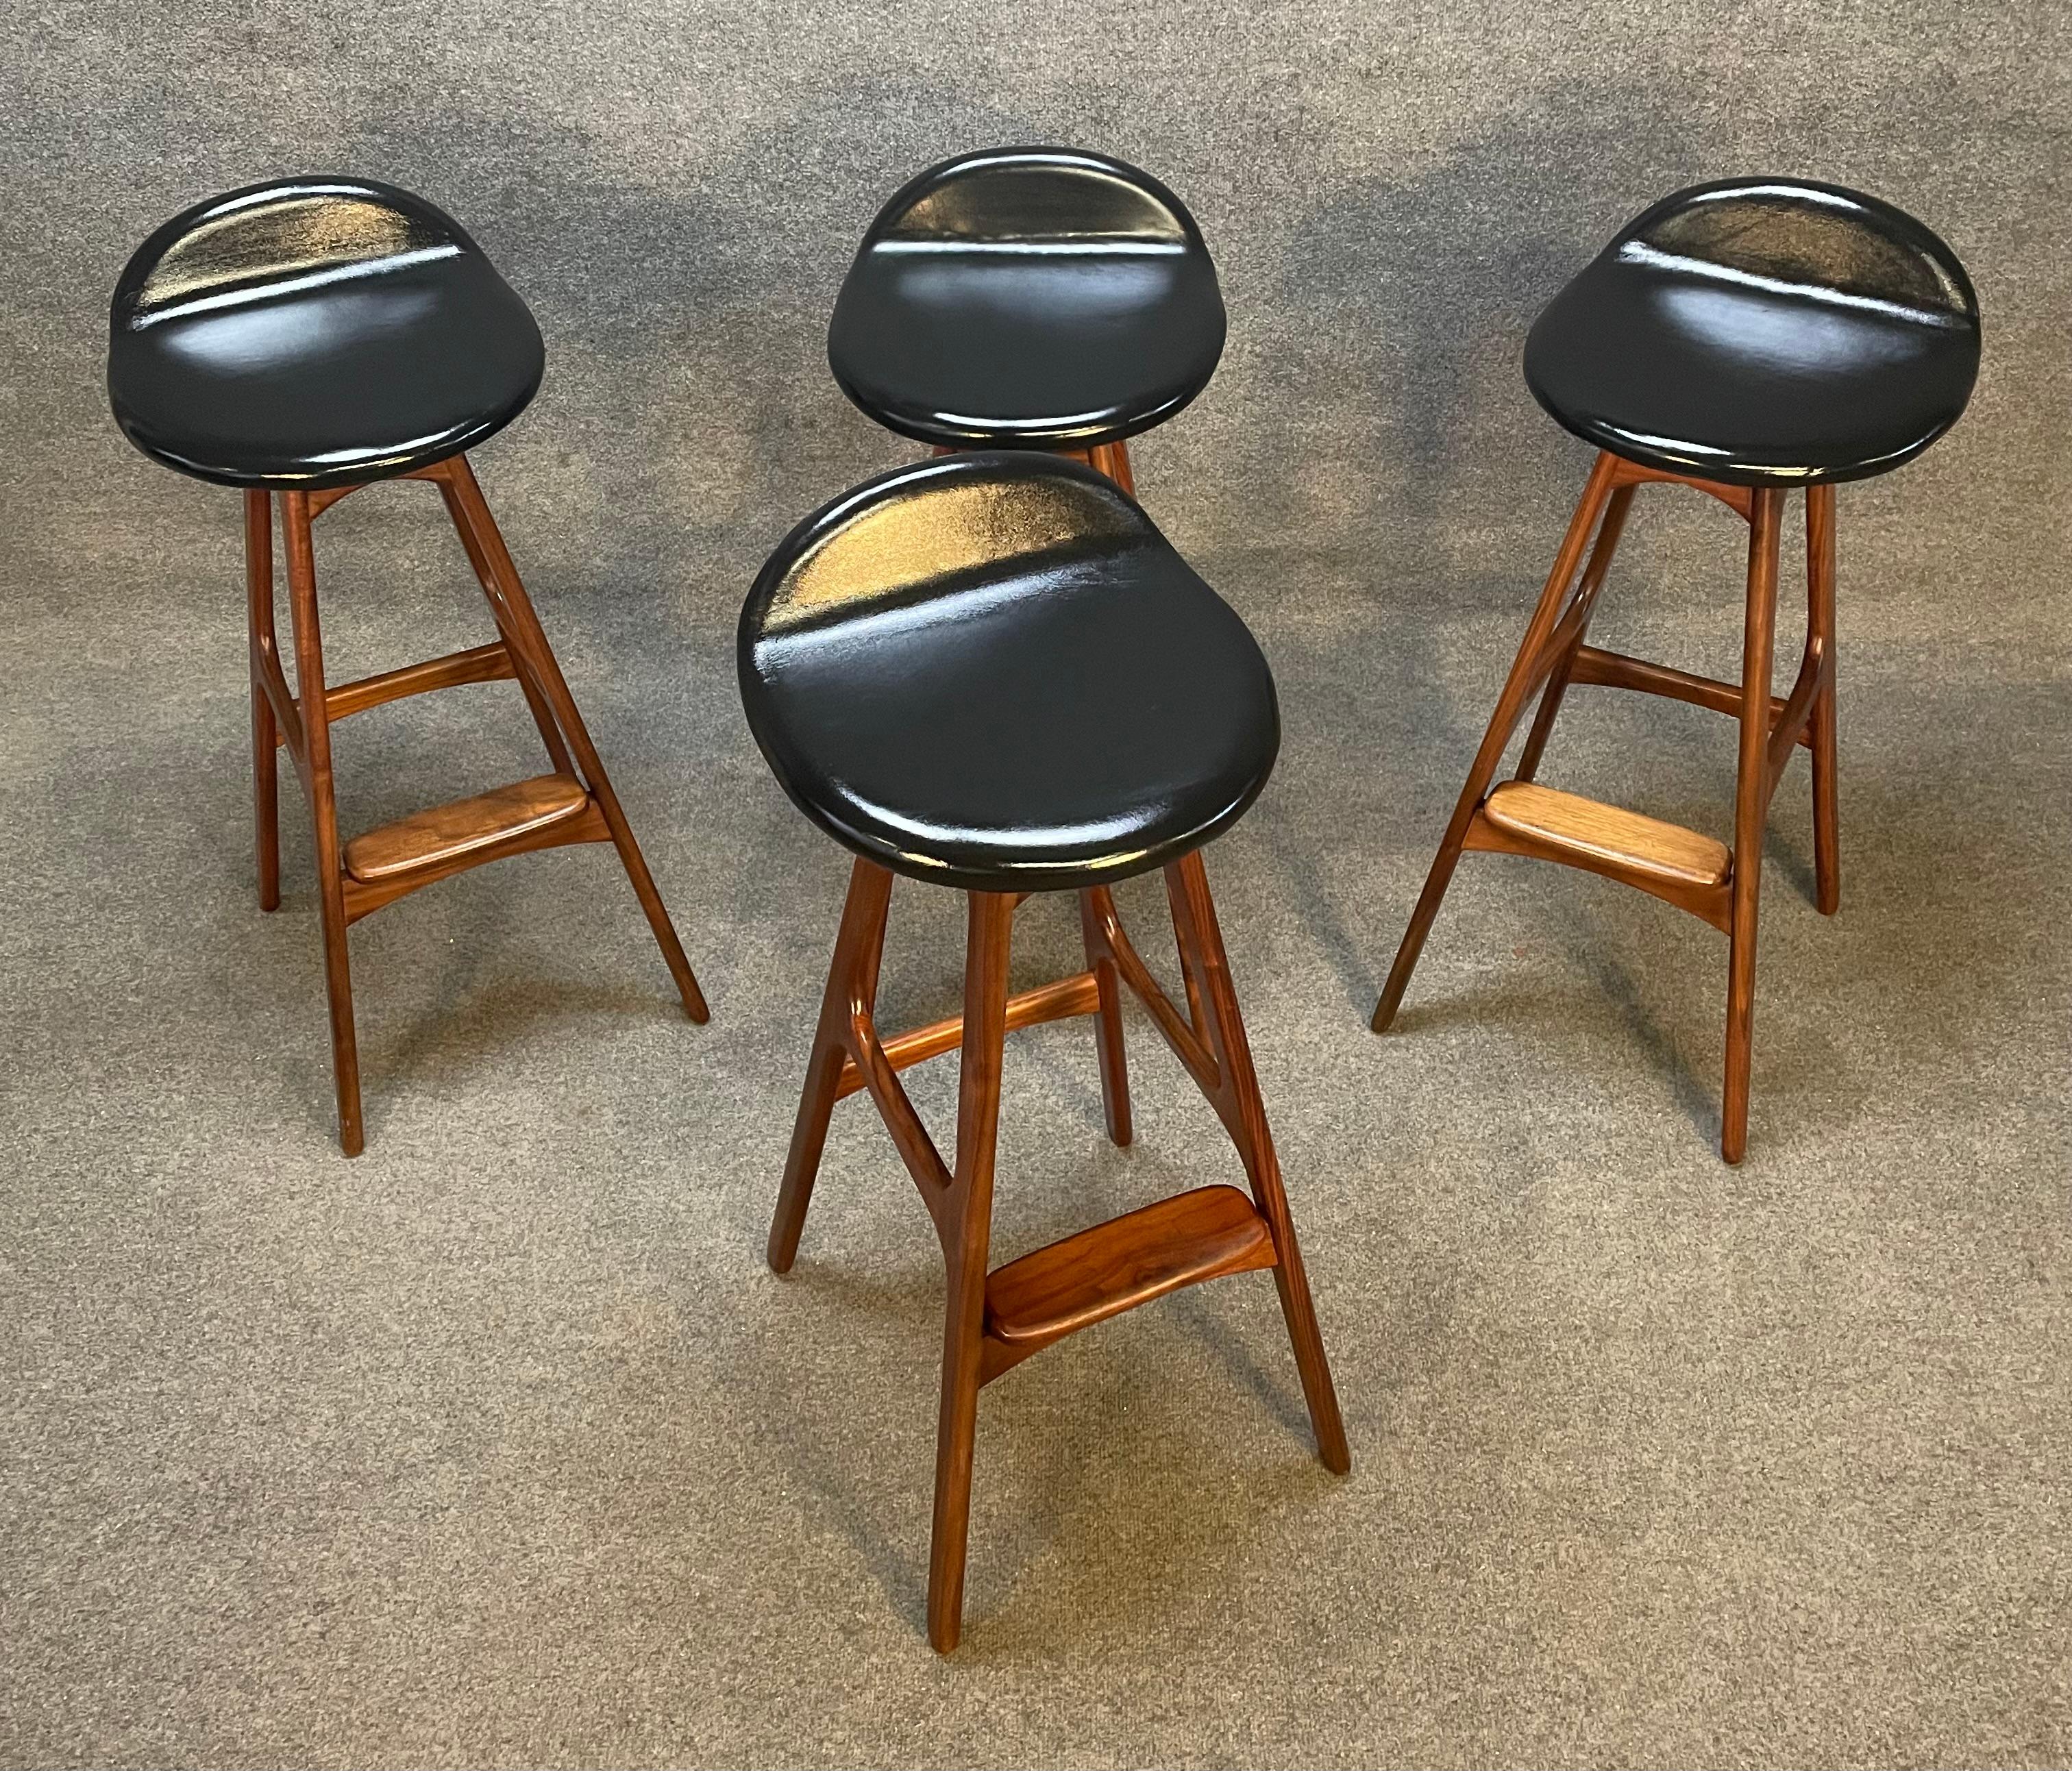 Here is a set of four Scandinavian Mid-Century Modern bar stool in solid walnut designed by Erik Buch and manufactured by Odense Mobeklfabrik in Denmark ion the 1960's.
These four comfortable stools, recently imported from Europe to California